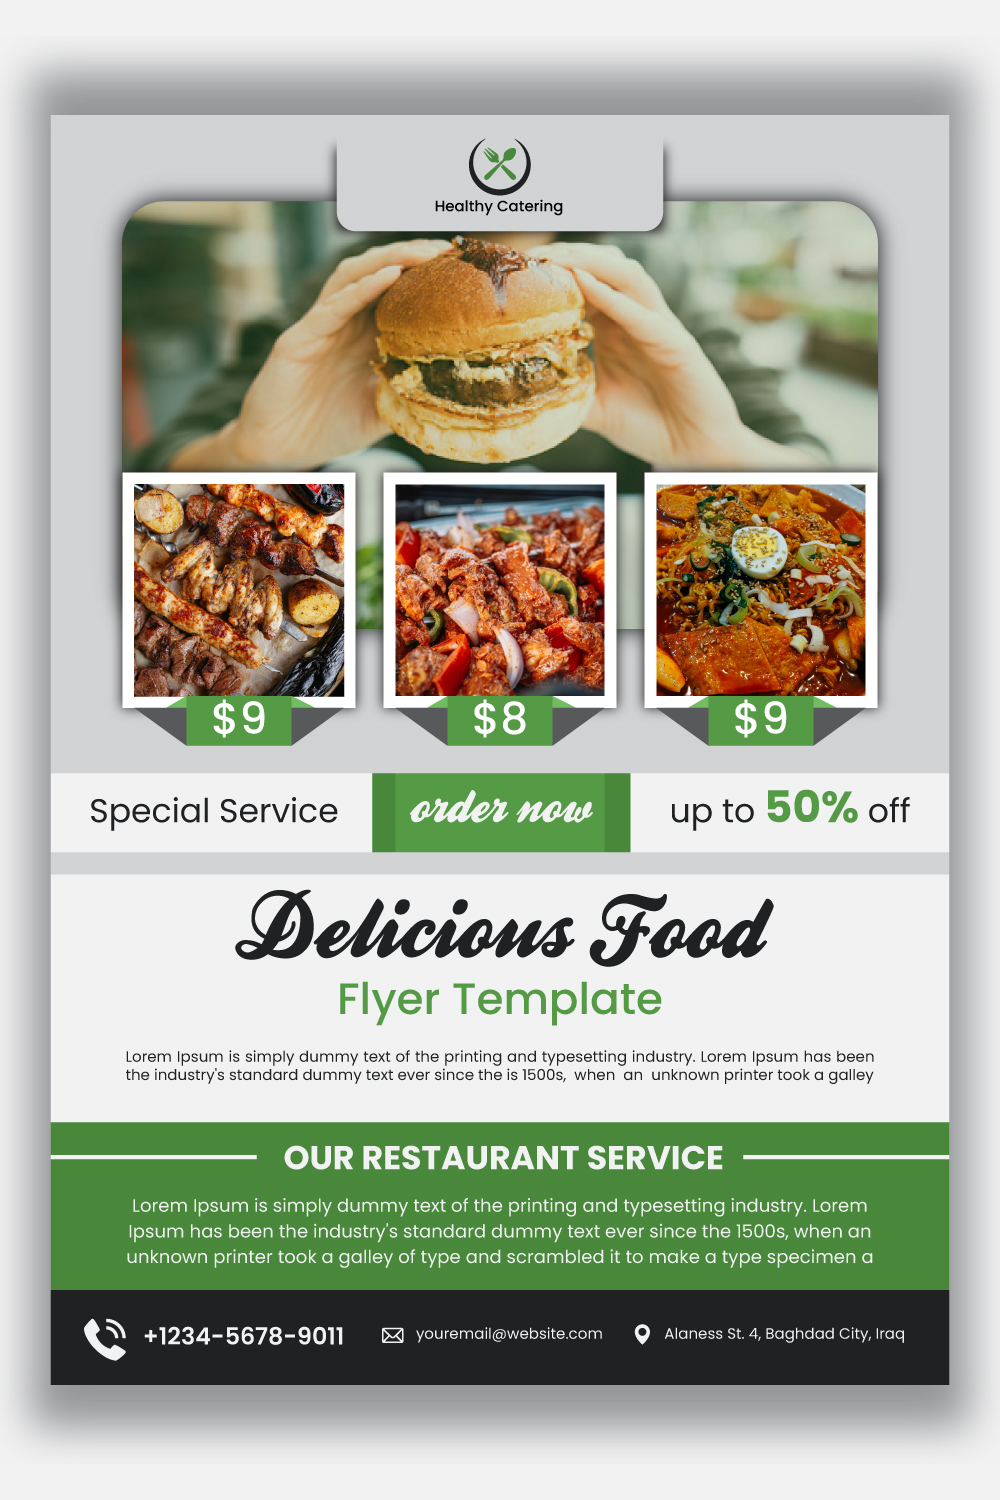 Delicious Food Flyer template pinterest preview image.